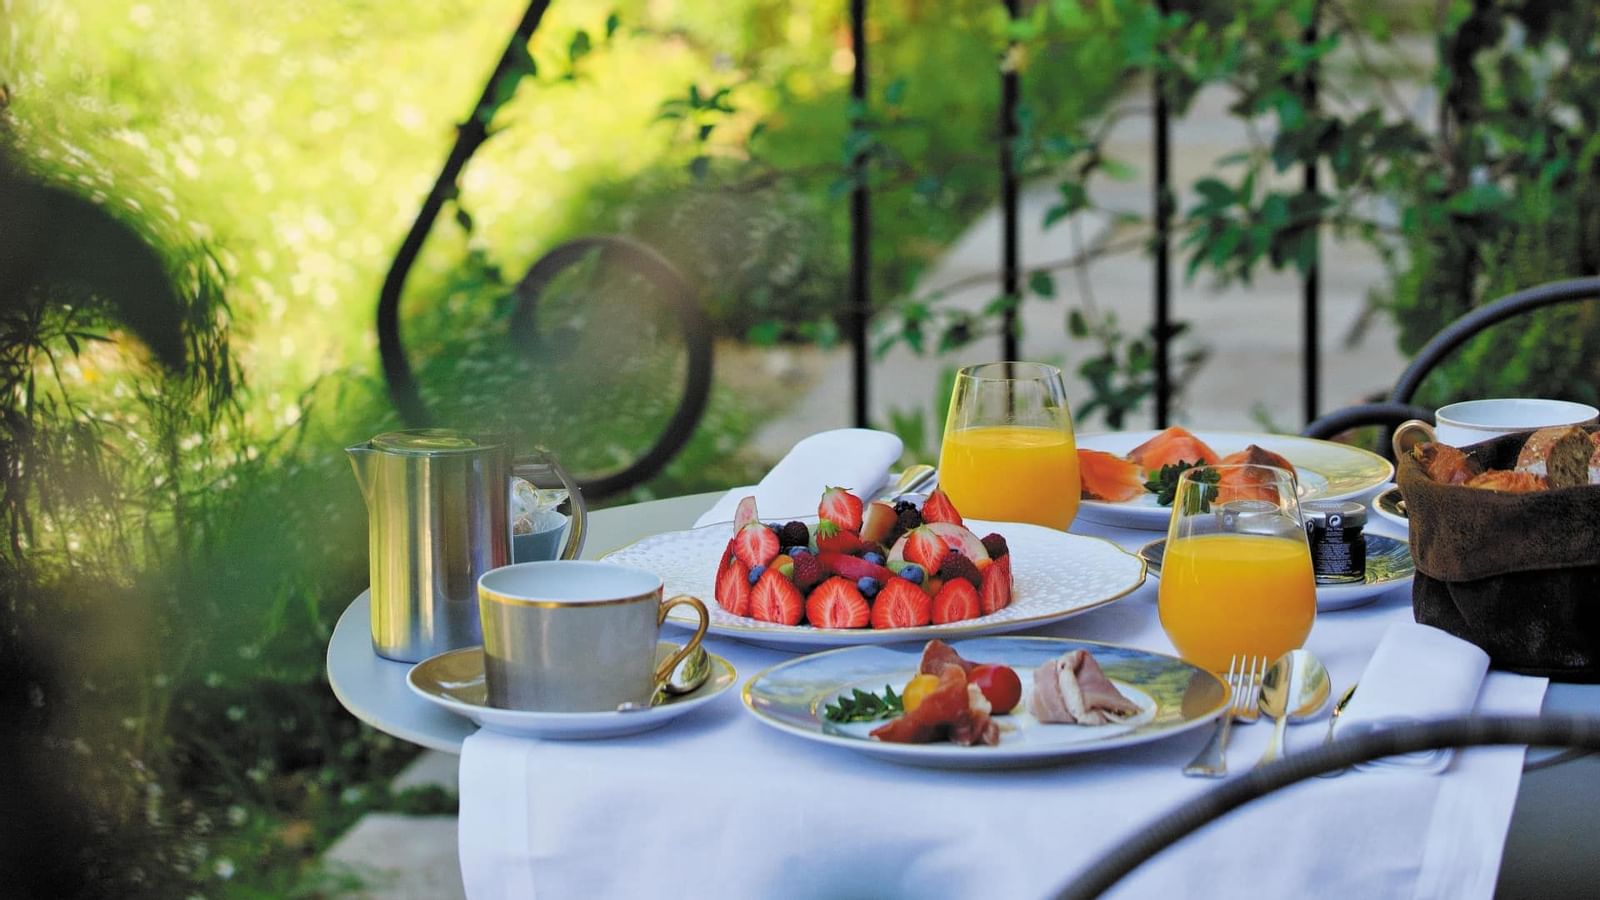 Breakfast served on a table outdoors, Domaine de Manville